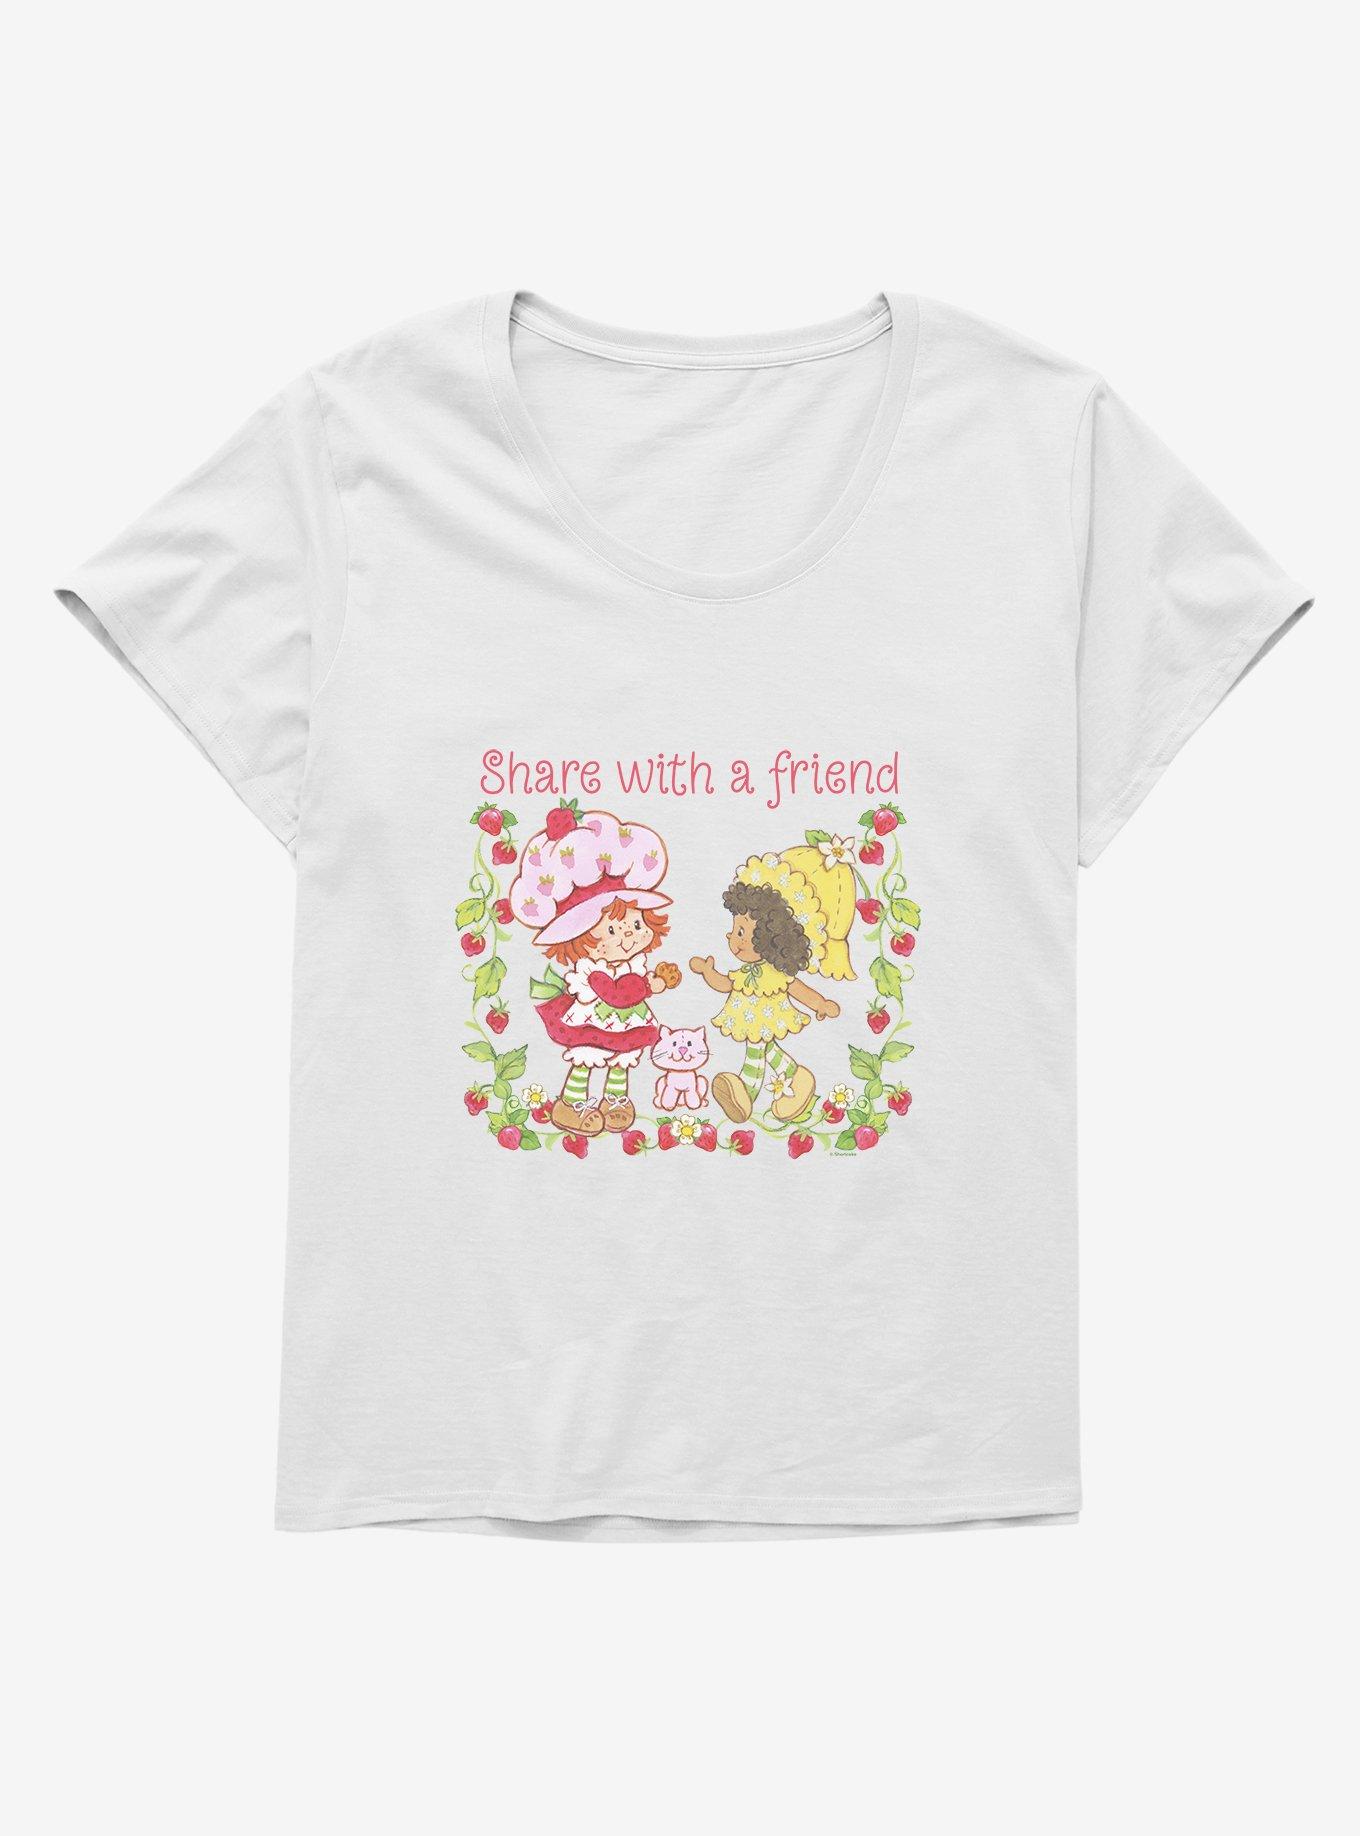 Strawberry Shortcake Share With A Friend Womens T-Shirt Plus Size, WHITE, hi-res